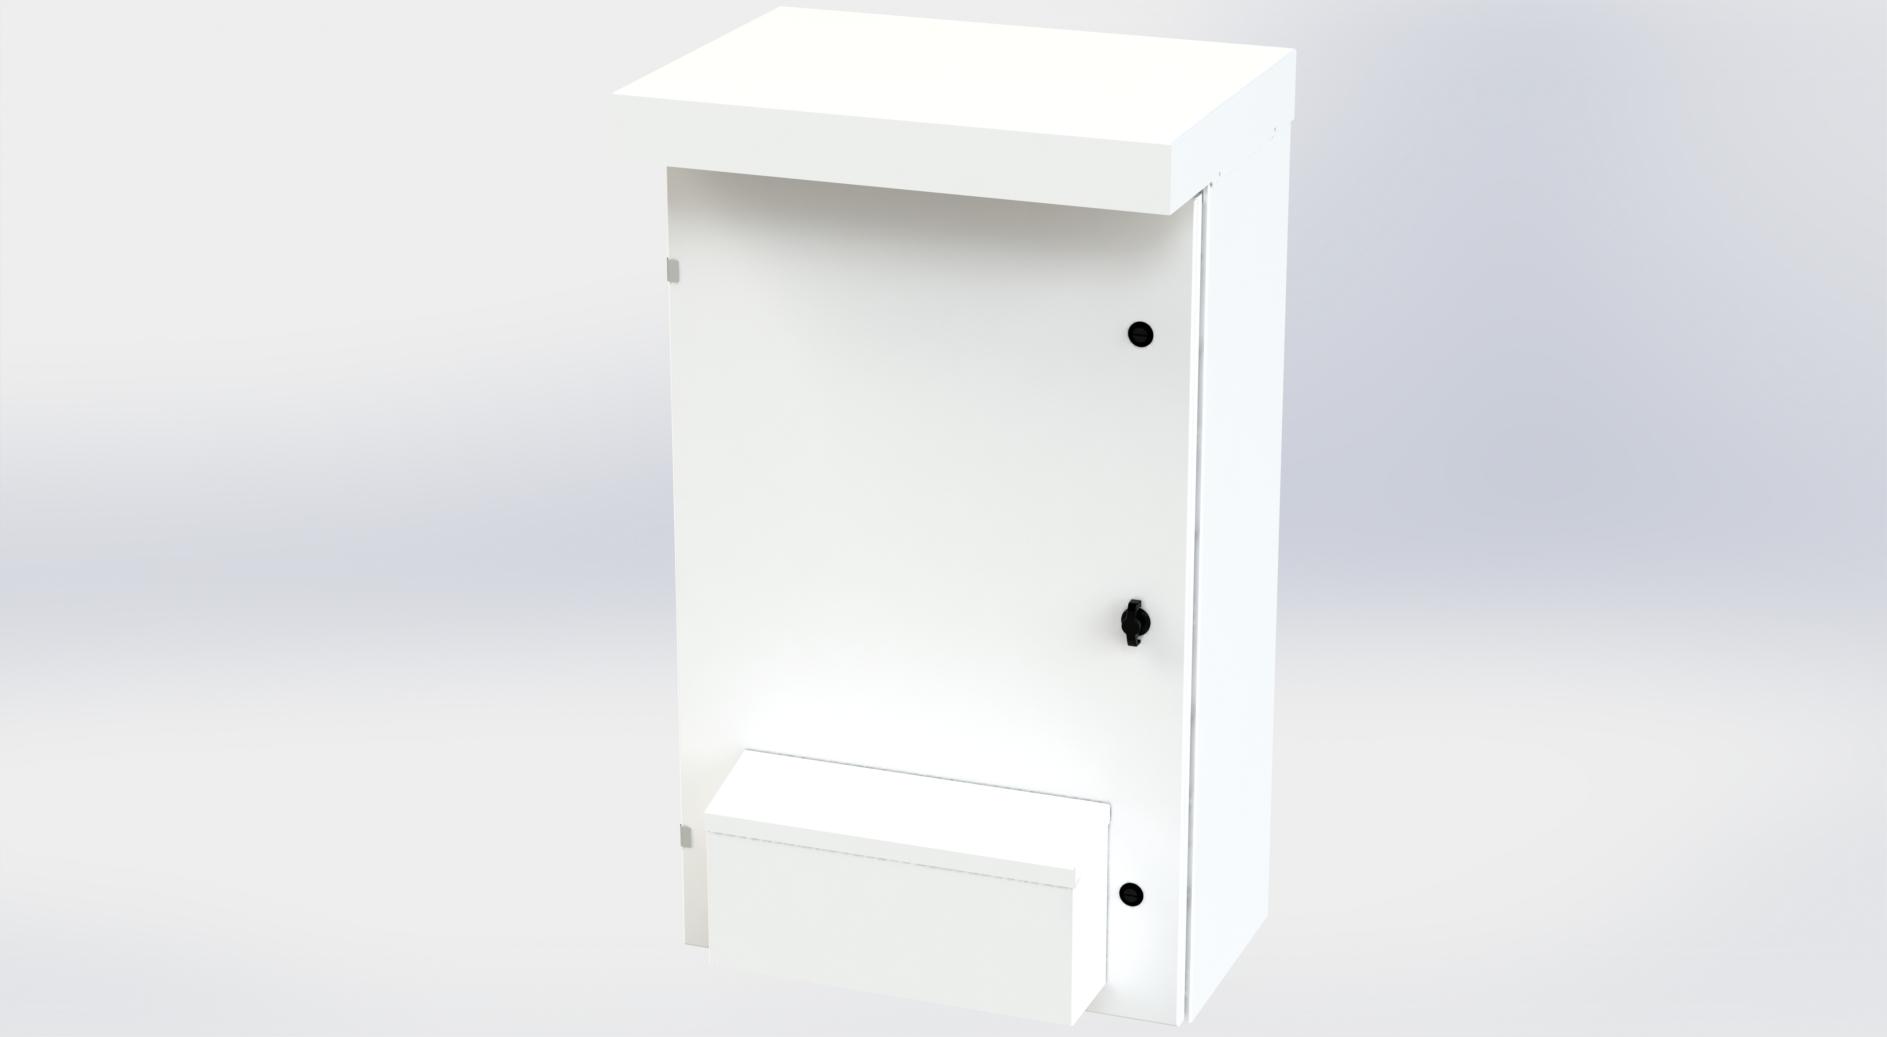 Saginaw Control SCE-41VR2412 Enclosure, Vented Type 3R, Height:41.00", Width:24.00", Depth:12.00", White powder coating inside and out. Optional sub-panels are powder coated white.